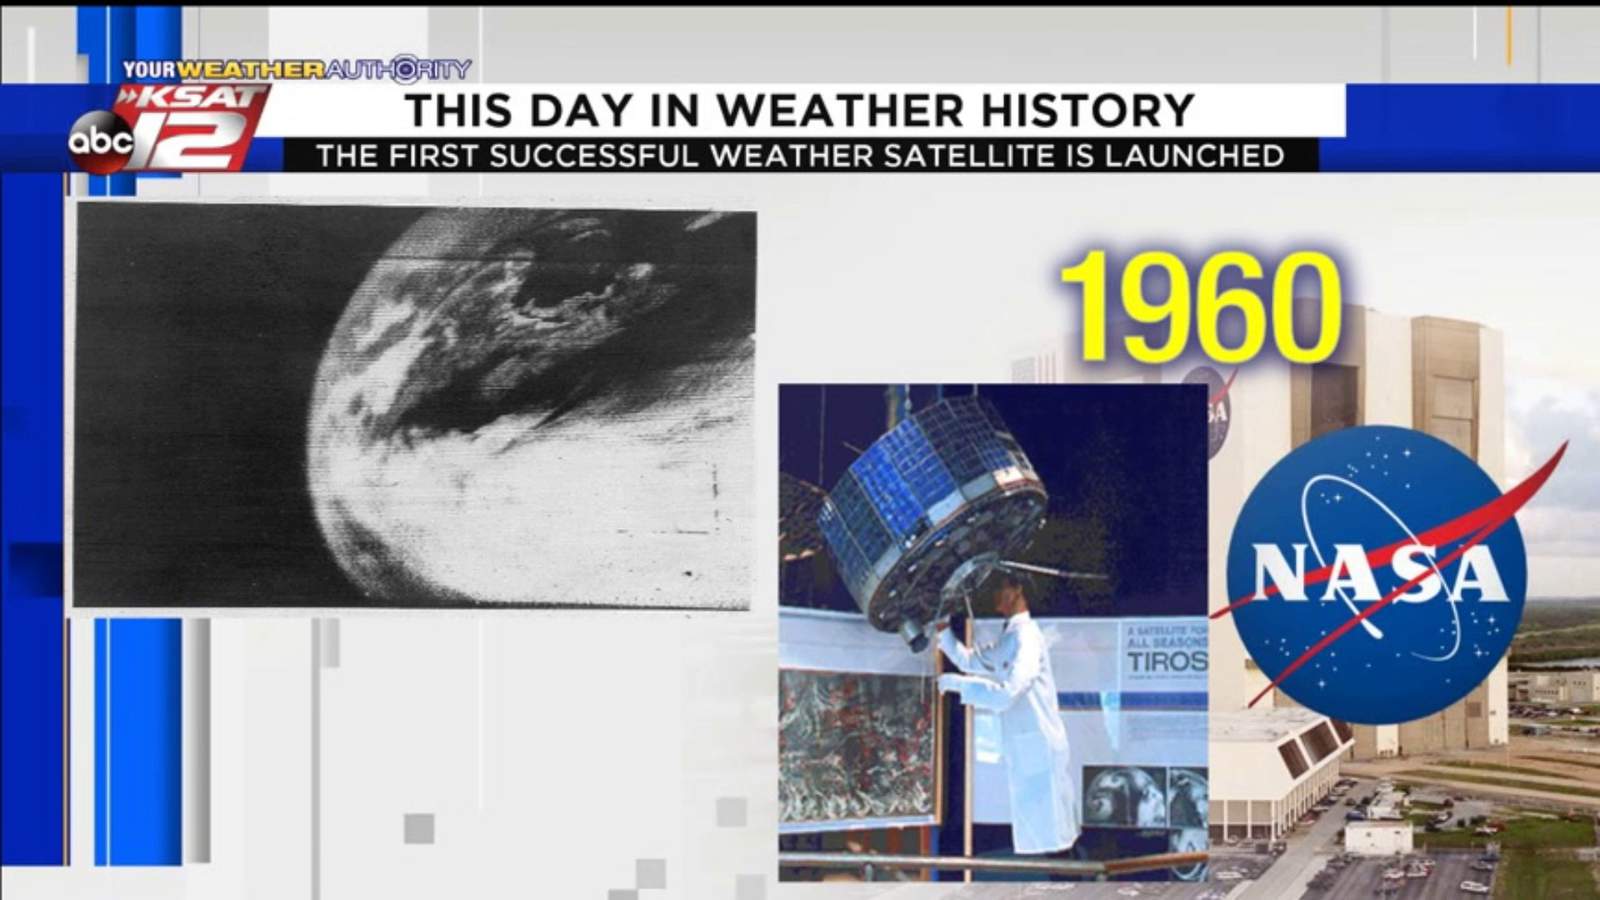 This Day in Weather History: April 1st